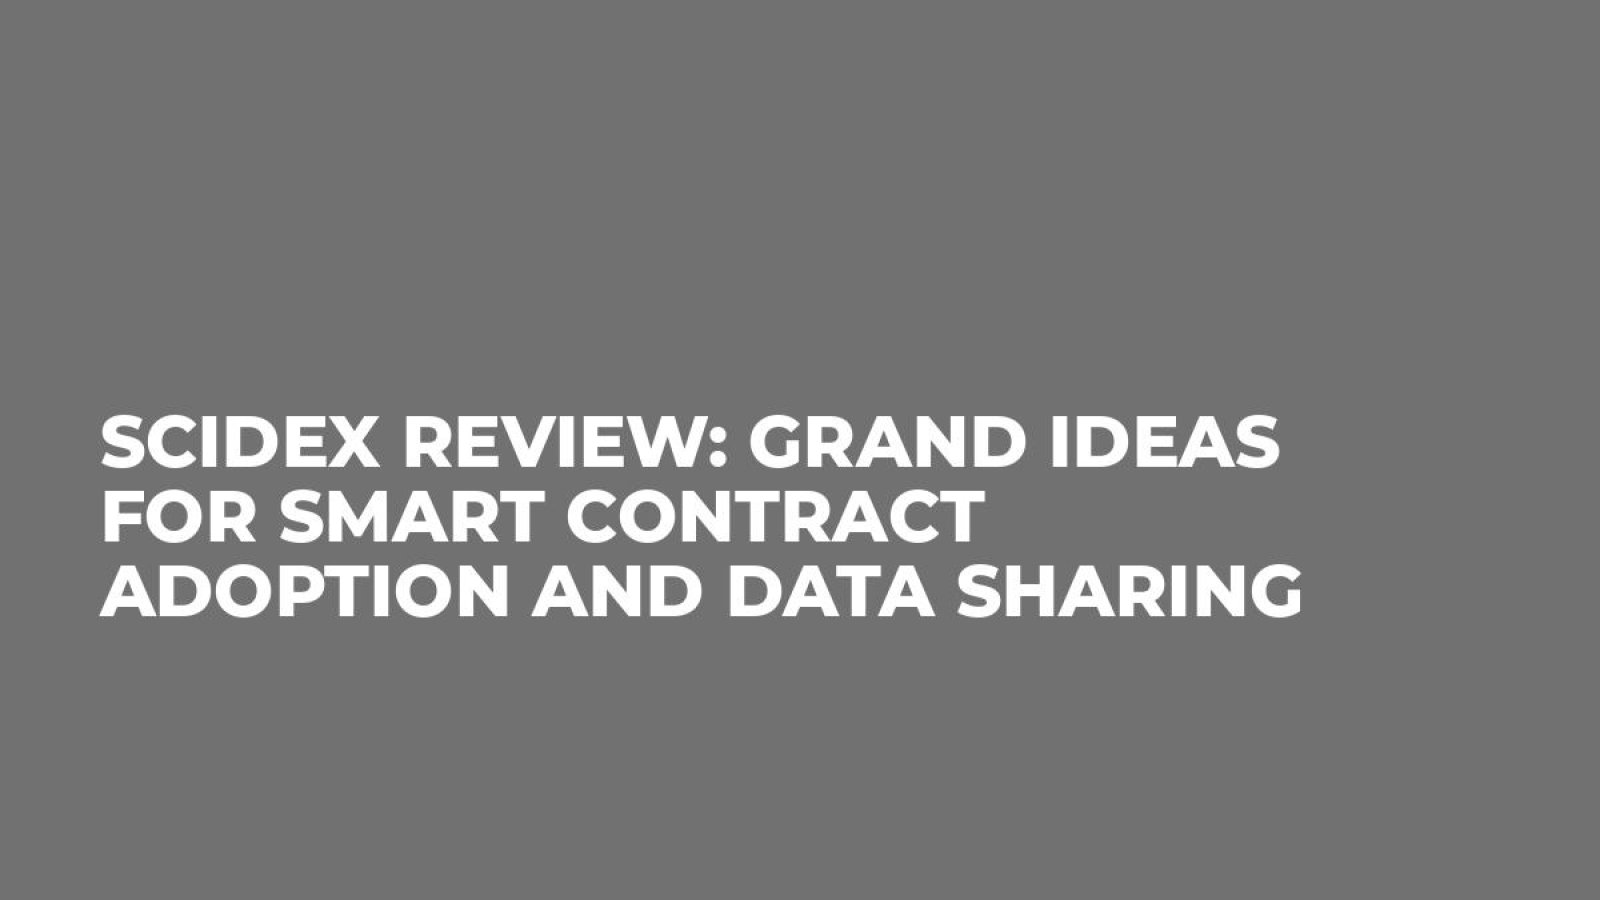 SciDex Review: Grand Ideas For Smart Contract Adoption and Data Sharing